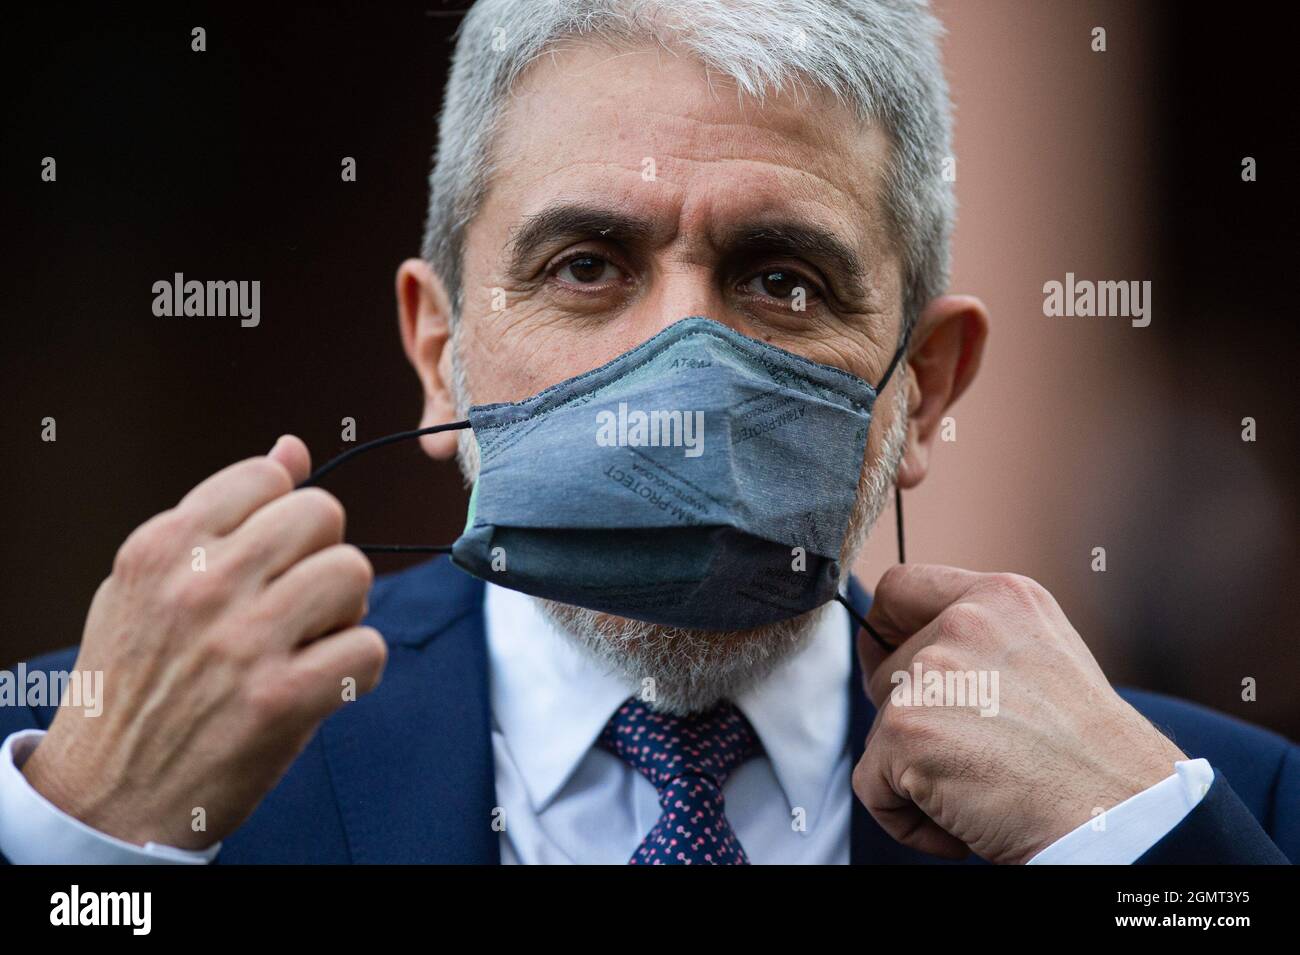 Buenos Aires, Argentina. 20th Sep, 2021. Anibal Fernandez, Designated Minister of Security of Argentina takes off his face mask during the event. After the Political Crisis of the Government of Alberto Fernandez in Argentina, ministers and officials were present at the swearing-in of the new Ministers held at the Government House in Buenos Aires, Argentina. (Photo by Manuel Cortina/SOPA Images/Sipa USA) Credit: Sipa USA/Alamy Live News Stock Photo